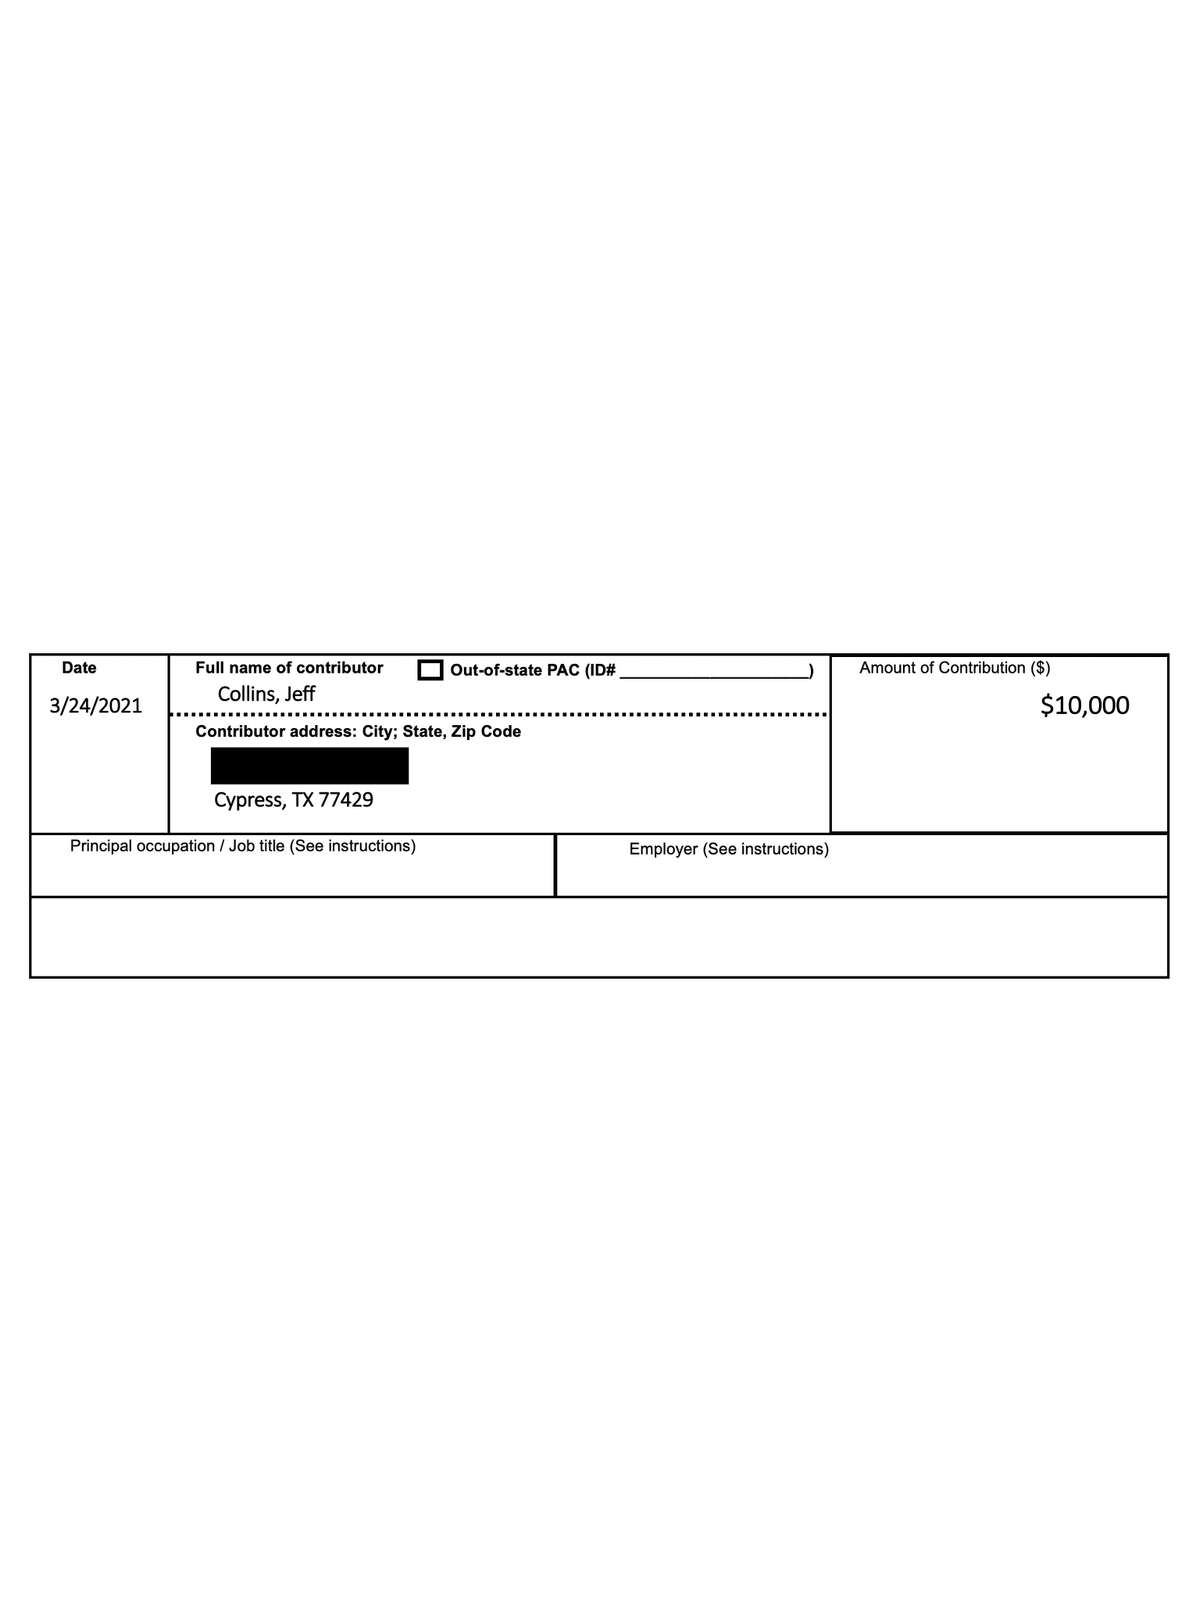 Partially filled out campaign contribution form